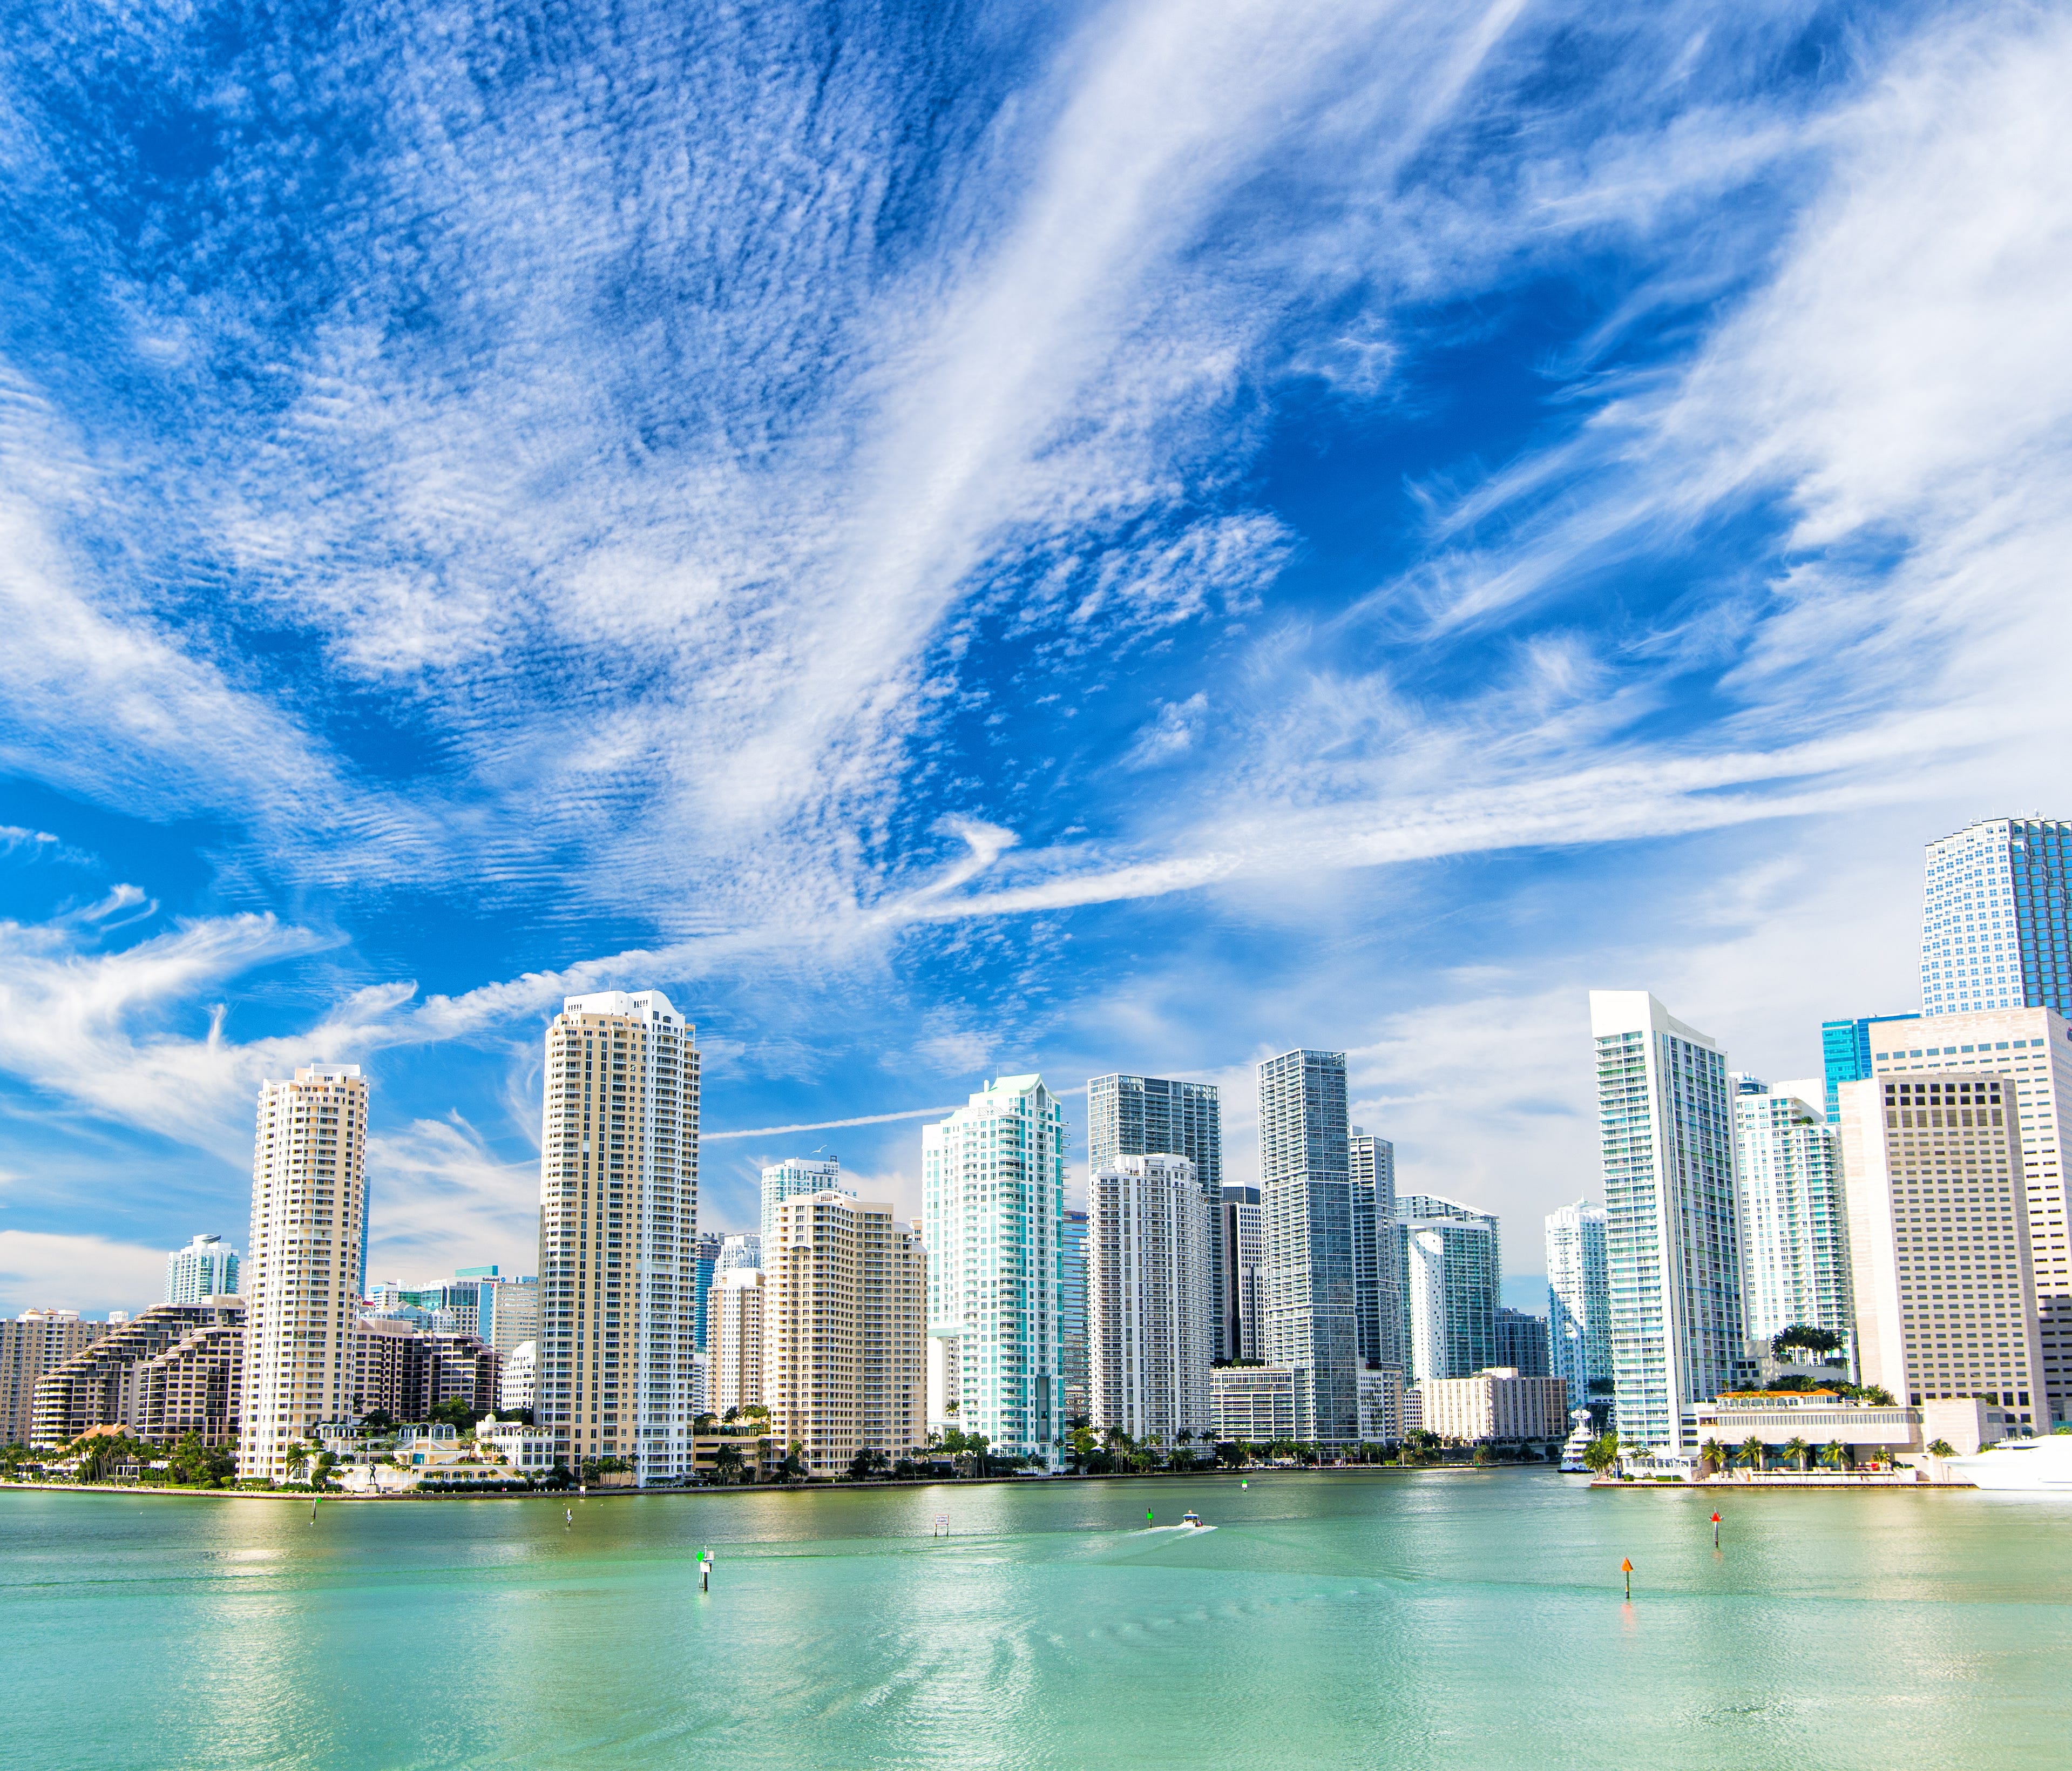 Hotel guests in desirable destinations like Miami are increasingly facing mandatory resort fees that don't show up in the room rate.